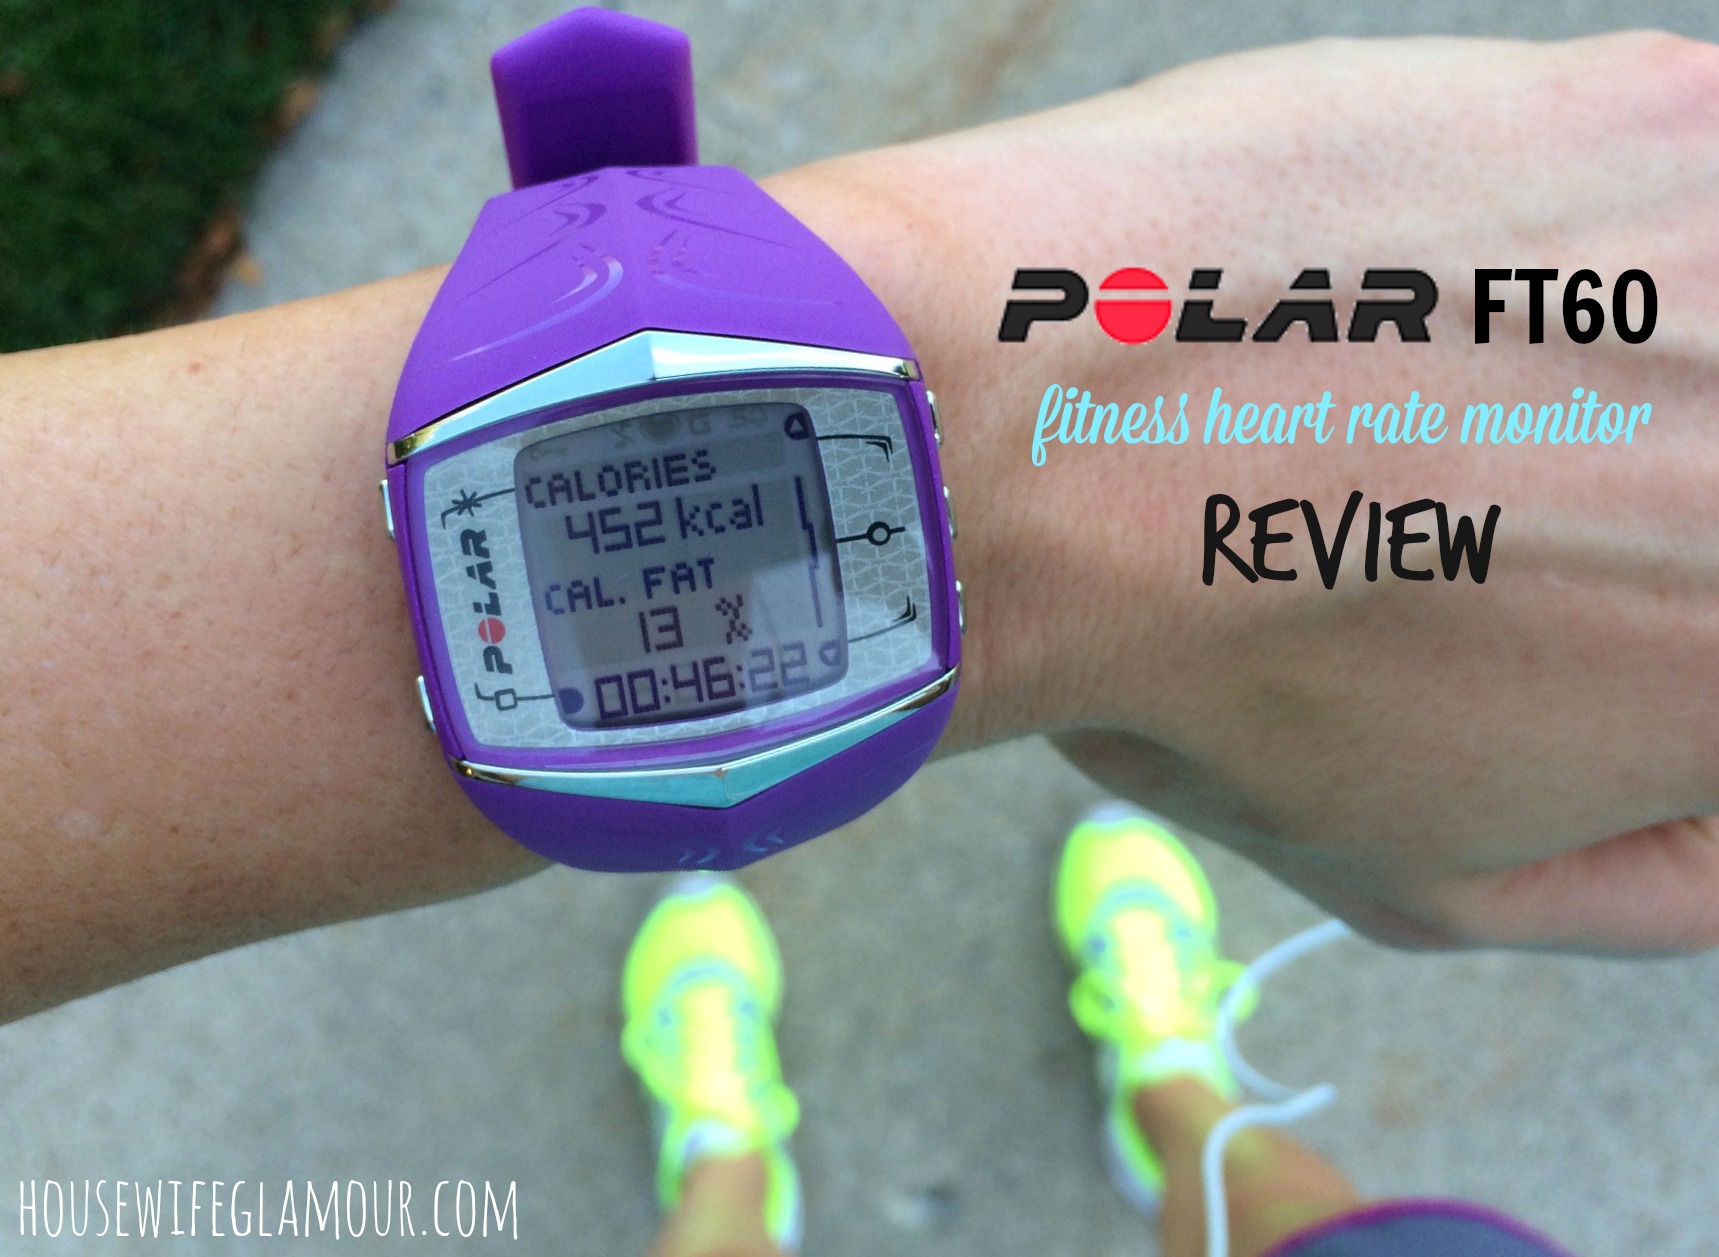 Polar FT60 fitness heart rate monitor review